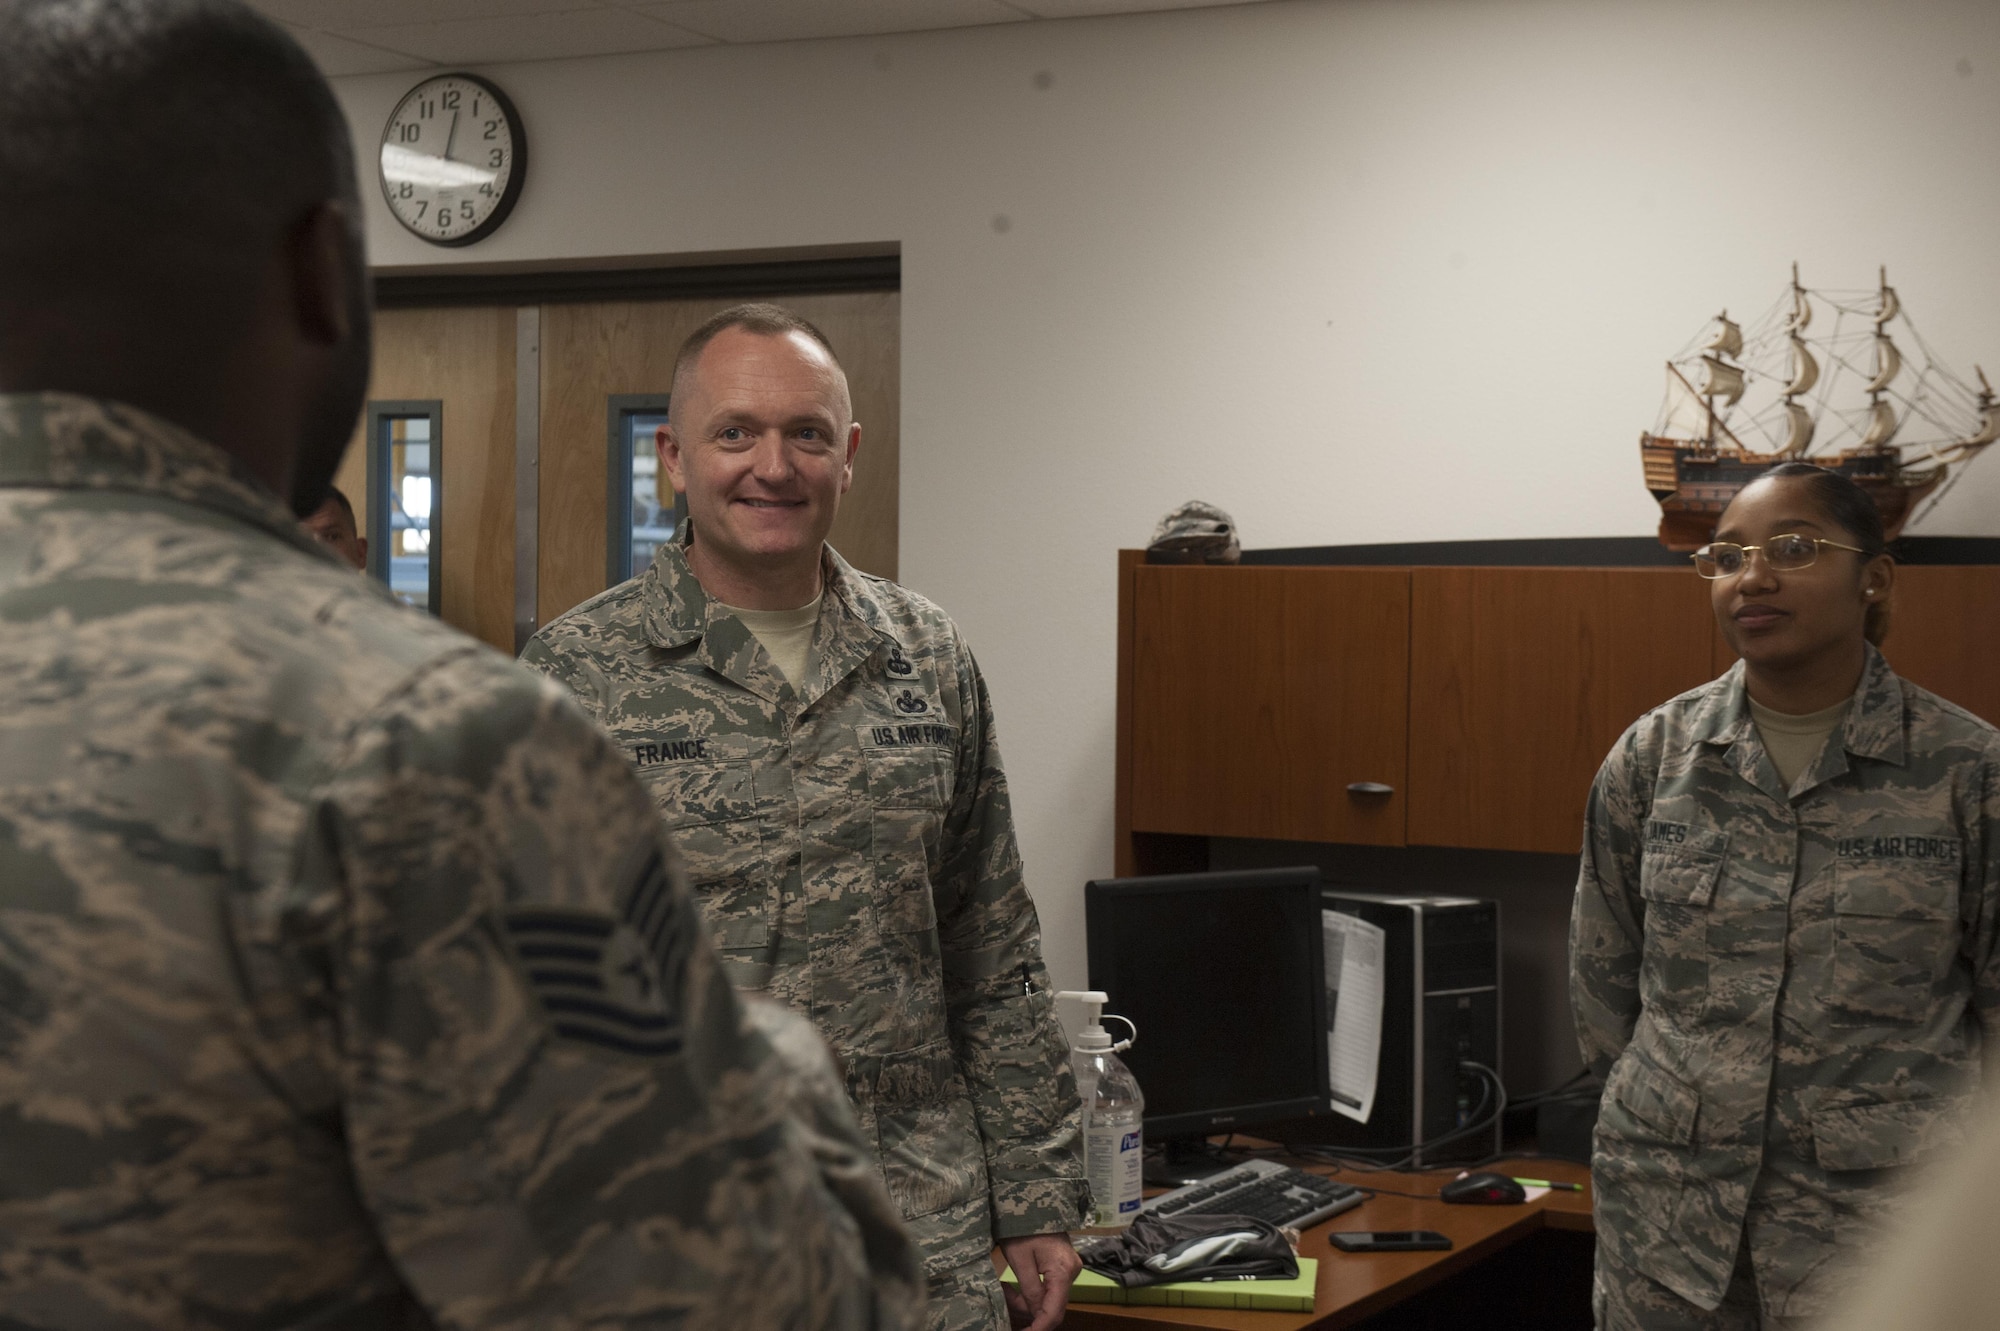 Chief Master Sgt. Jason France, Air Force Materiel Command command chief, meets with Basic Expeditionary Airfield Resources Base Airmen at Holloman Air Force Base, N.M., June 6, 2017. France traveled around BEAR Base receiving briefings from Airmen explaining how civil engineer personnel assigned to BEAR Base are unique and the importance of the various capabilities that they possess. (U.S. Air Force photo by Airman 1st Class Ilyana A. Escalona)